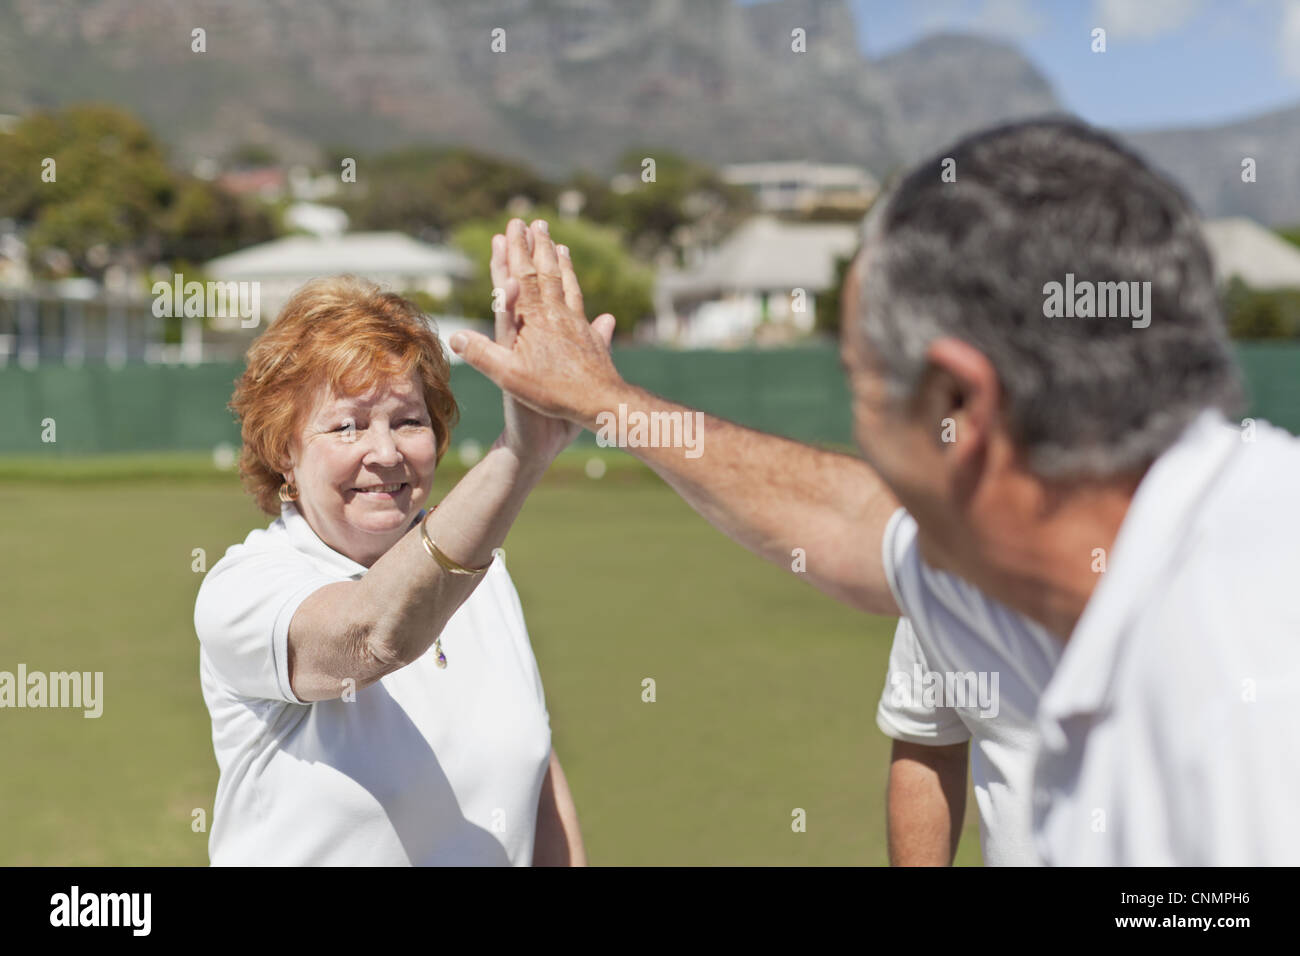 Older couple high fiving outdoors Stock Photo